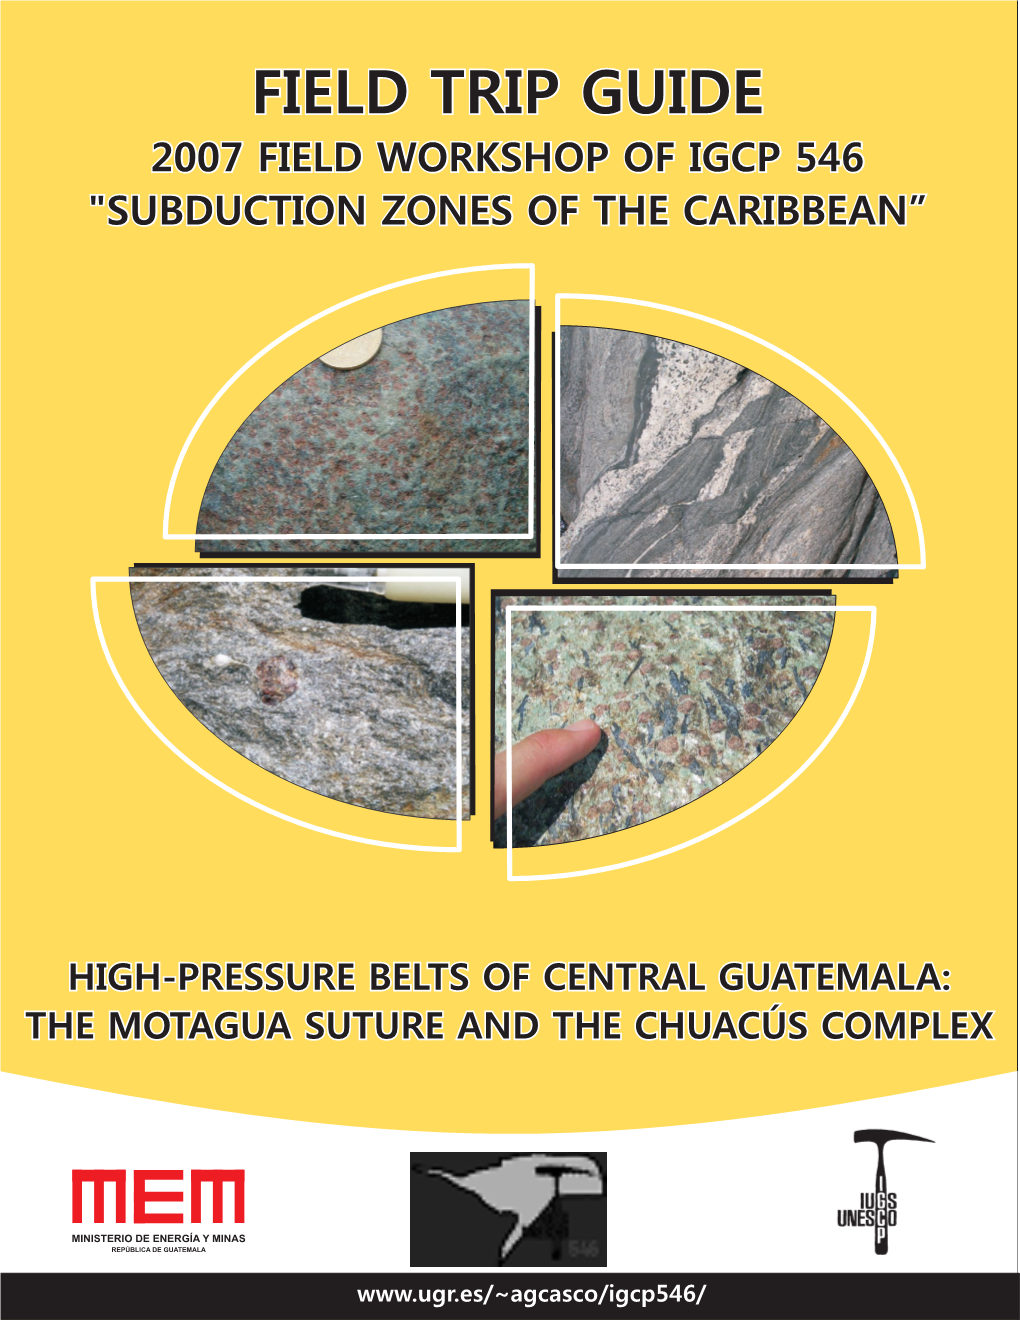 Field Trip Guide 1St Field Workshop of IGCP 546 “Subduction Zones of the Caribbean”